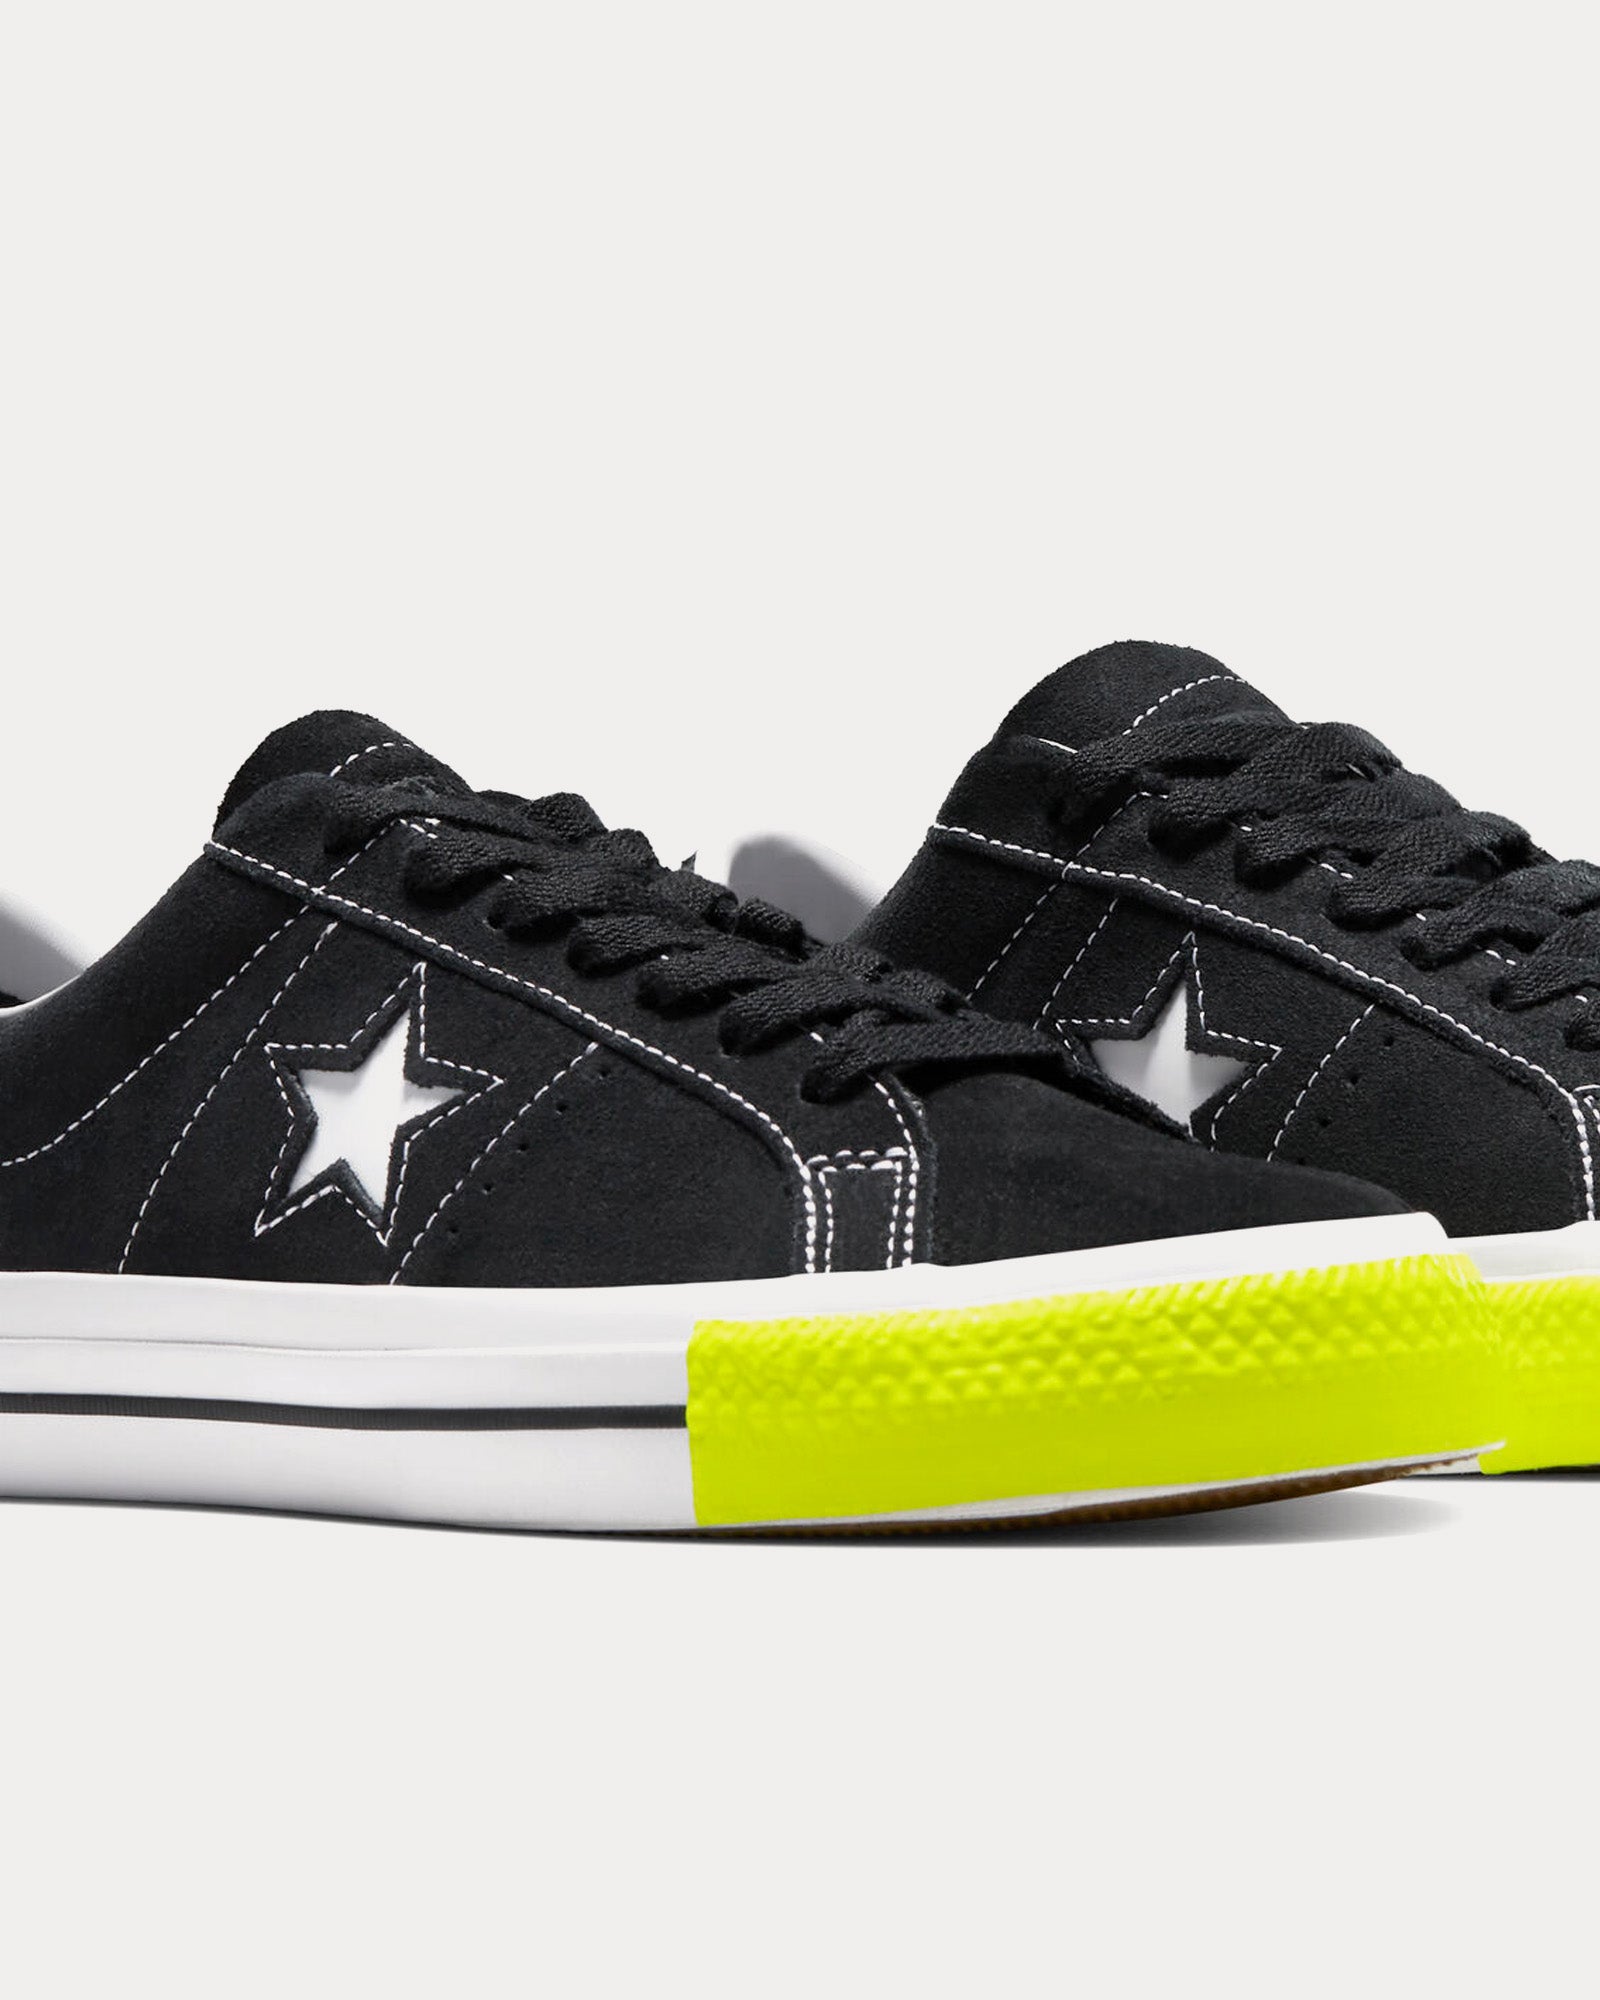 Converse - One Star Pro Milano Black / Milano Yellow Low Top Sneakers